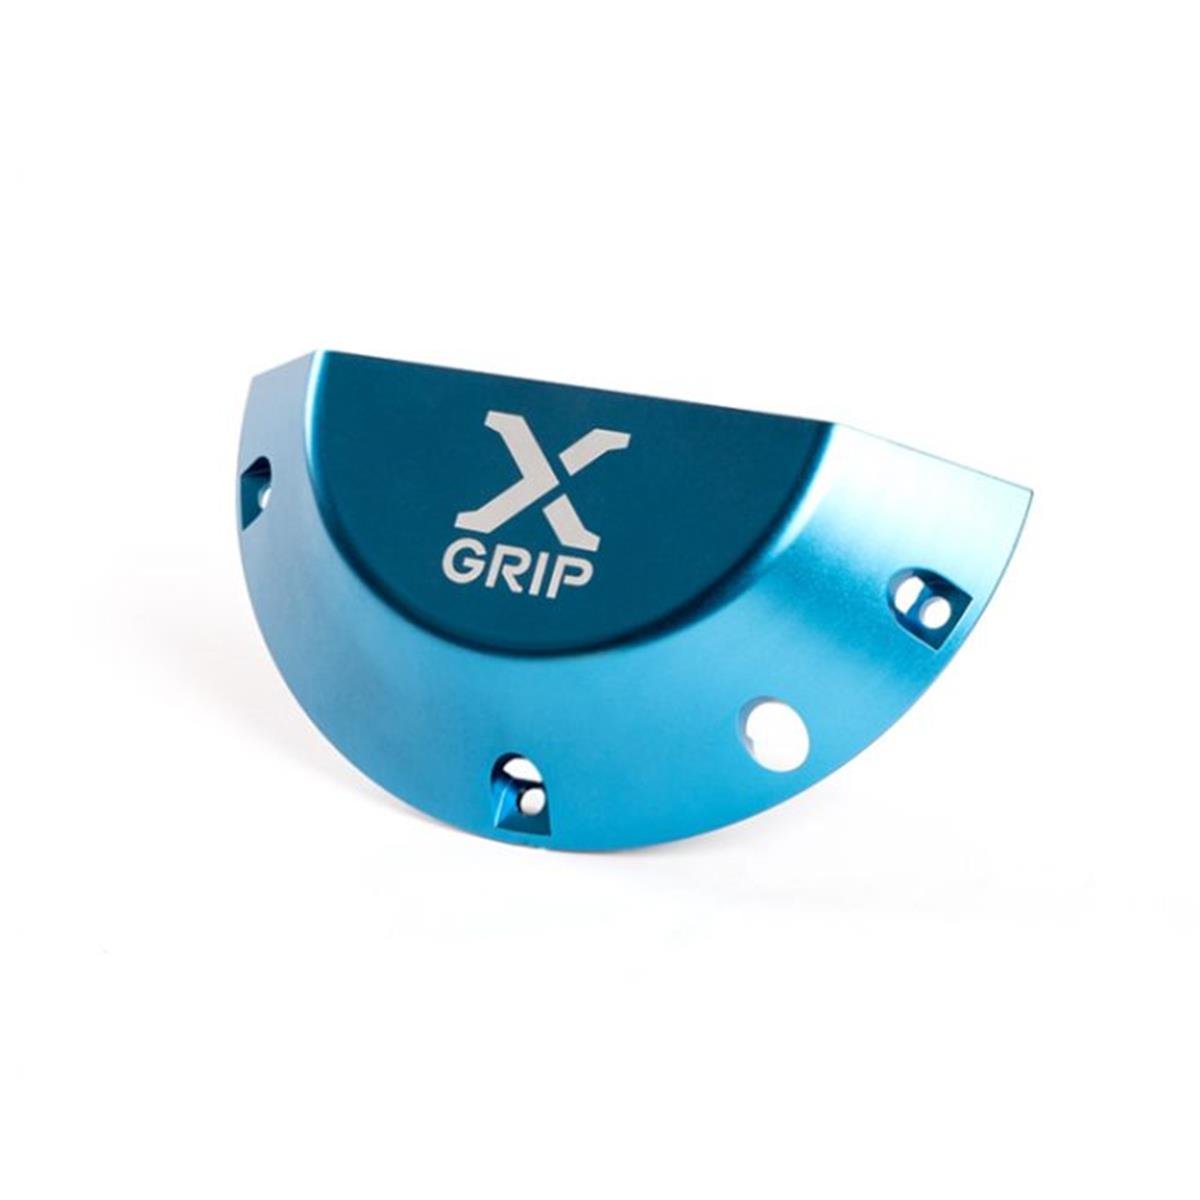 X-Grip Protection Embrayage Clutch Cover Guard KTM EXC 250/300 17-20, Husqvarna TE 250/300 17-20, Blue